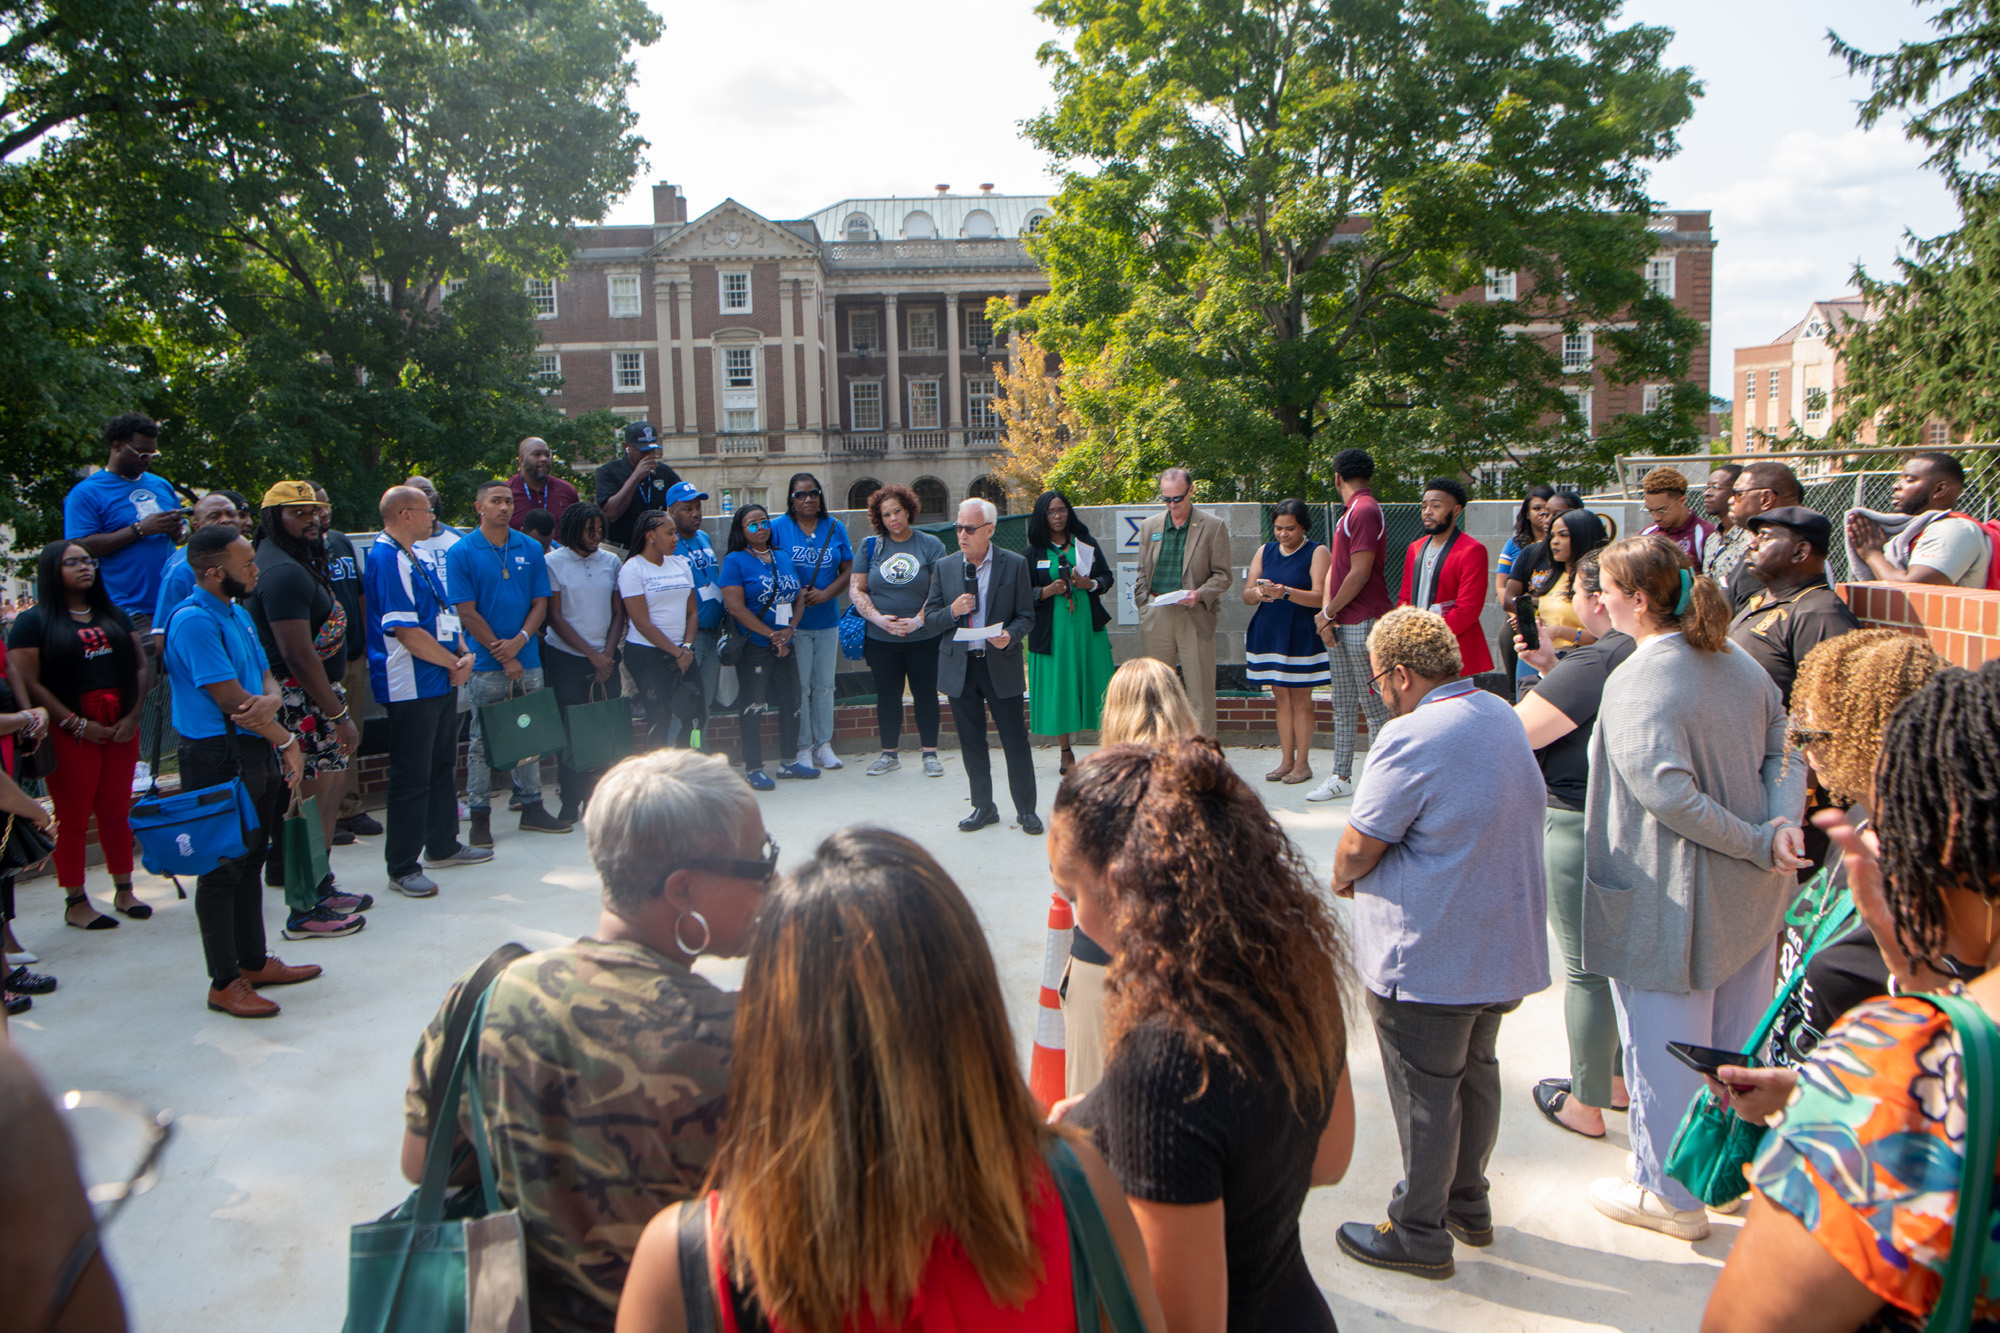 Ohio University President Hugh Sherman noted how the plaza not only celebrates but creates awareness of OHIO’s National Pan-Hellenic Council. Scheduled for completion in November, the plaza will feature the names and information about each of the council’s fraternities and sororities.